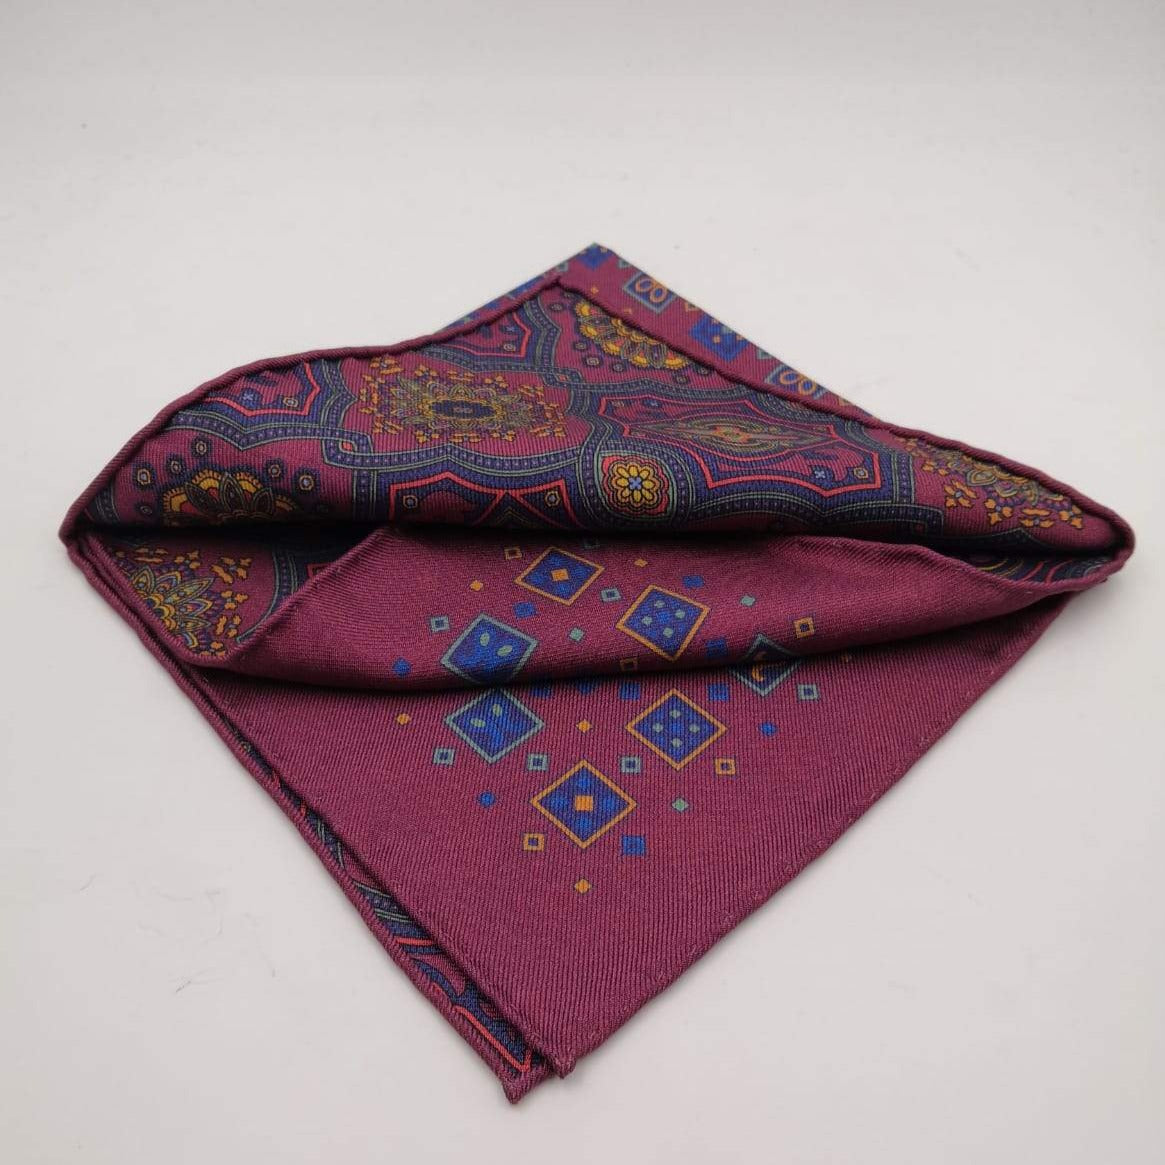 Cruciani & Bella Hand-rolled   100% Silk Purple and Blue Double Faces Patterned  Motif  Pocket Square Made in England 31 cm X 31 cm #5749